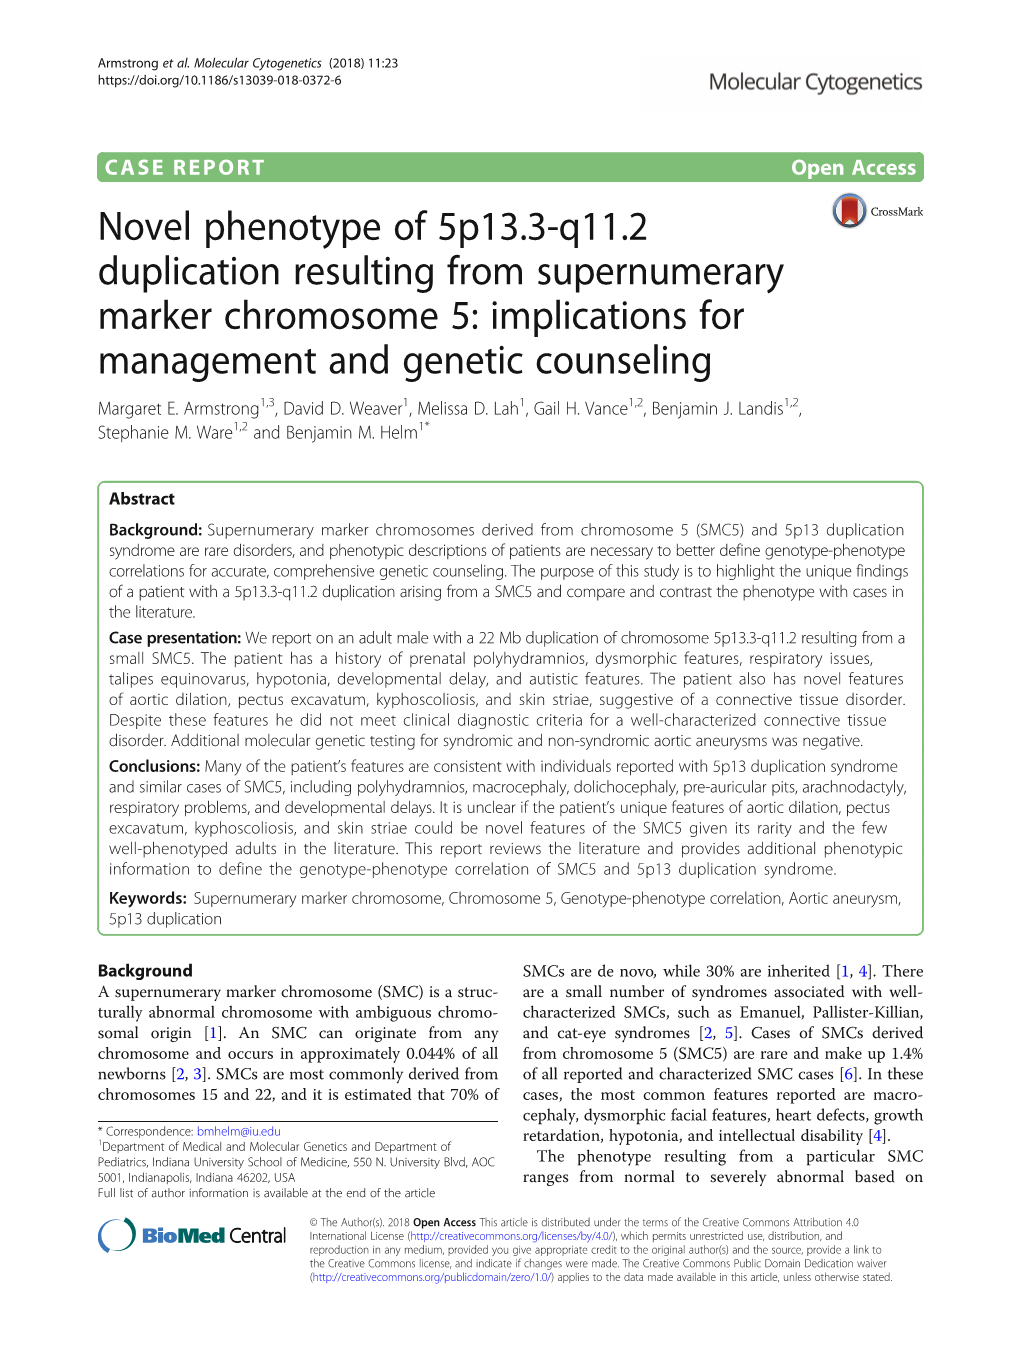 Novel Phenotype of 5P13.3-Q11.2 Duplication Resulting from Supernumerary Marker Chromosome 5: Implications for Management and Genetic Counseling Margaret E